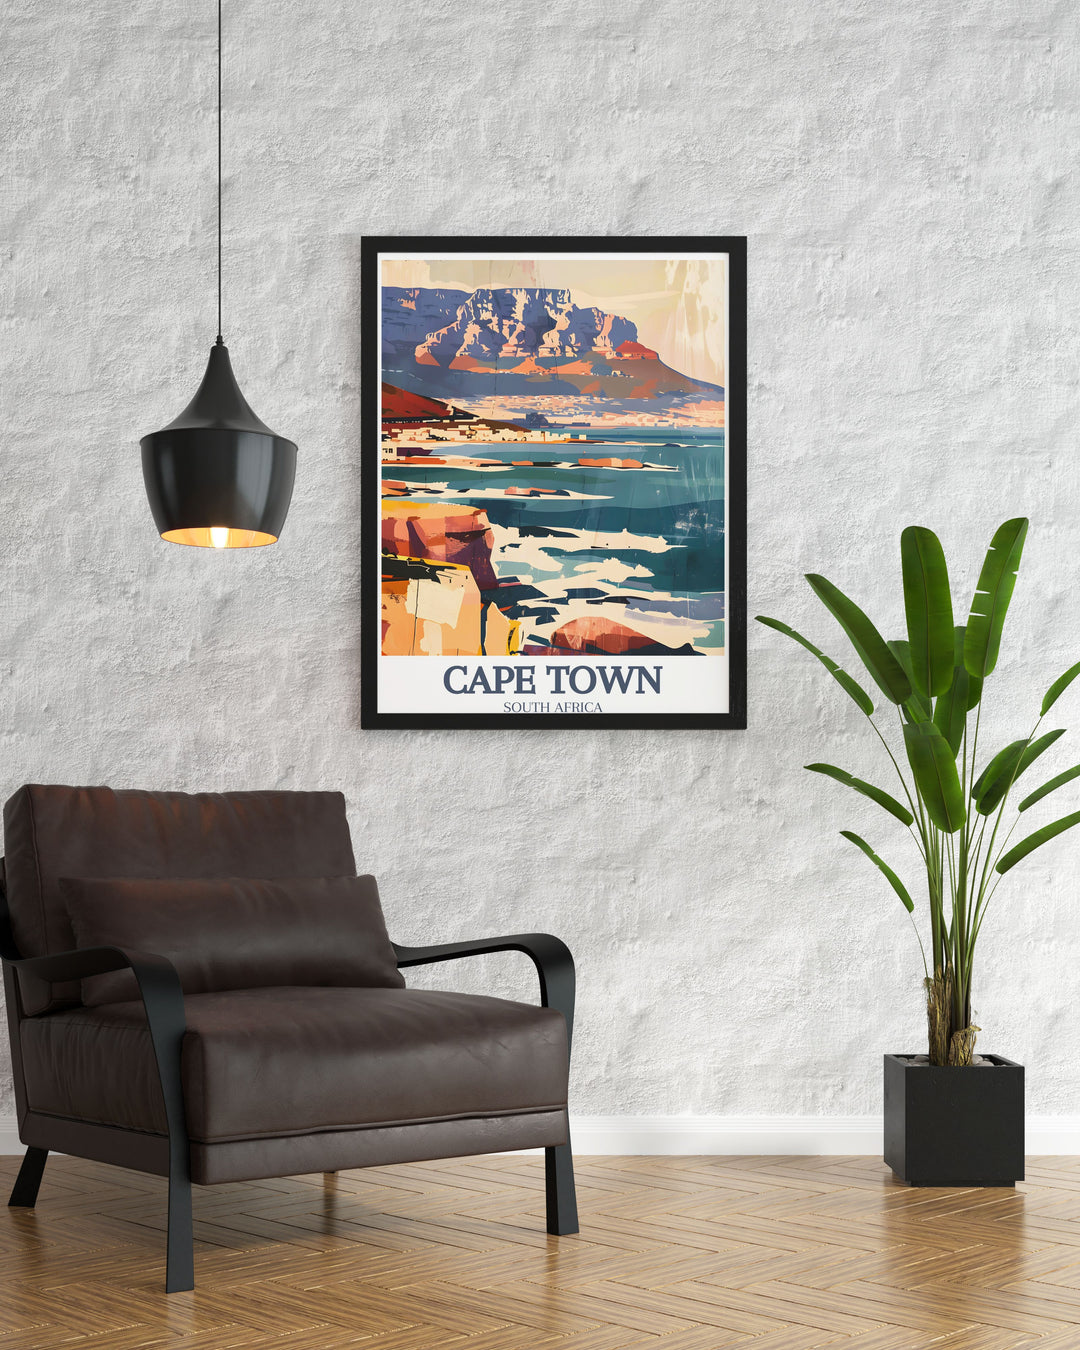 Beautiful South Africa wall decor showcasing the iconic Table Mountain and Cape of Good Hope. This Cape Town poster is perfect for enhancing your living space with the natural beauty of South Africas landscapes. Ideal for travel and art lovers alike.